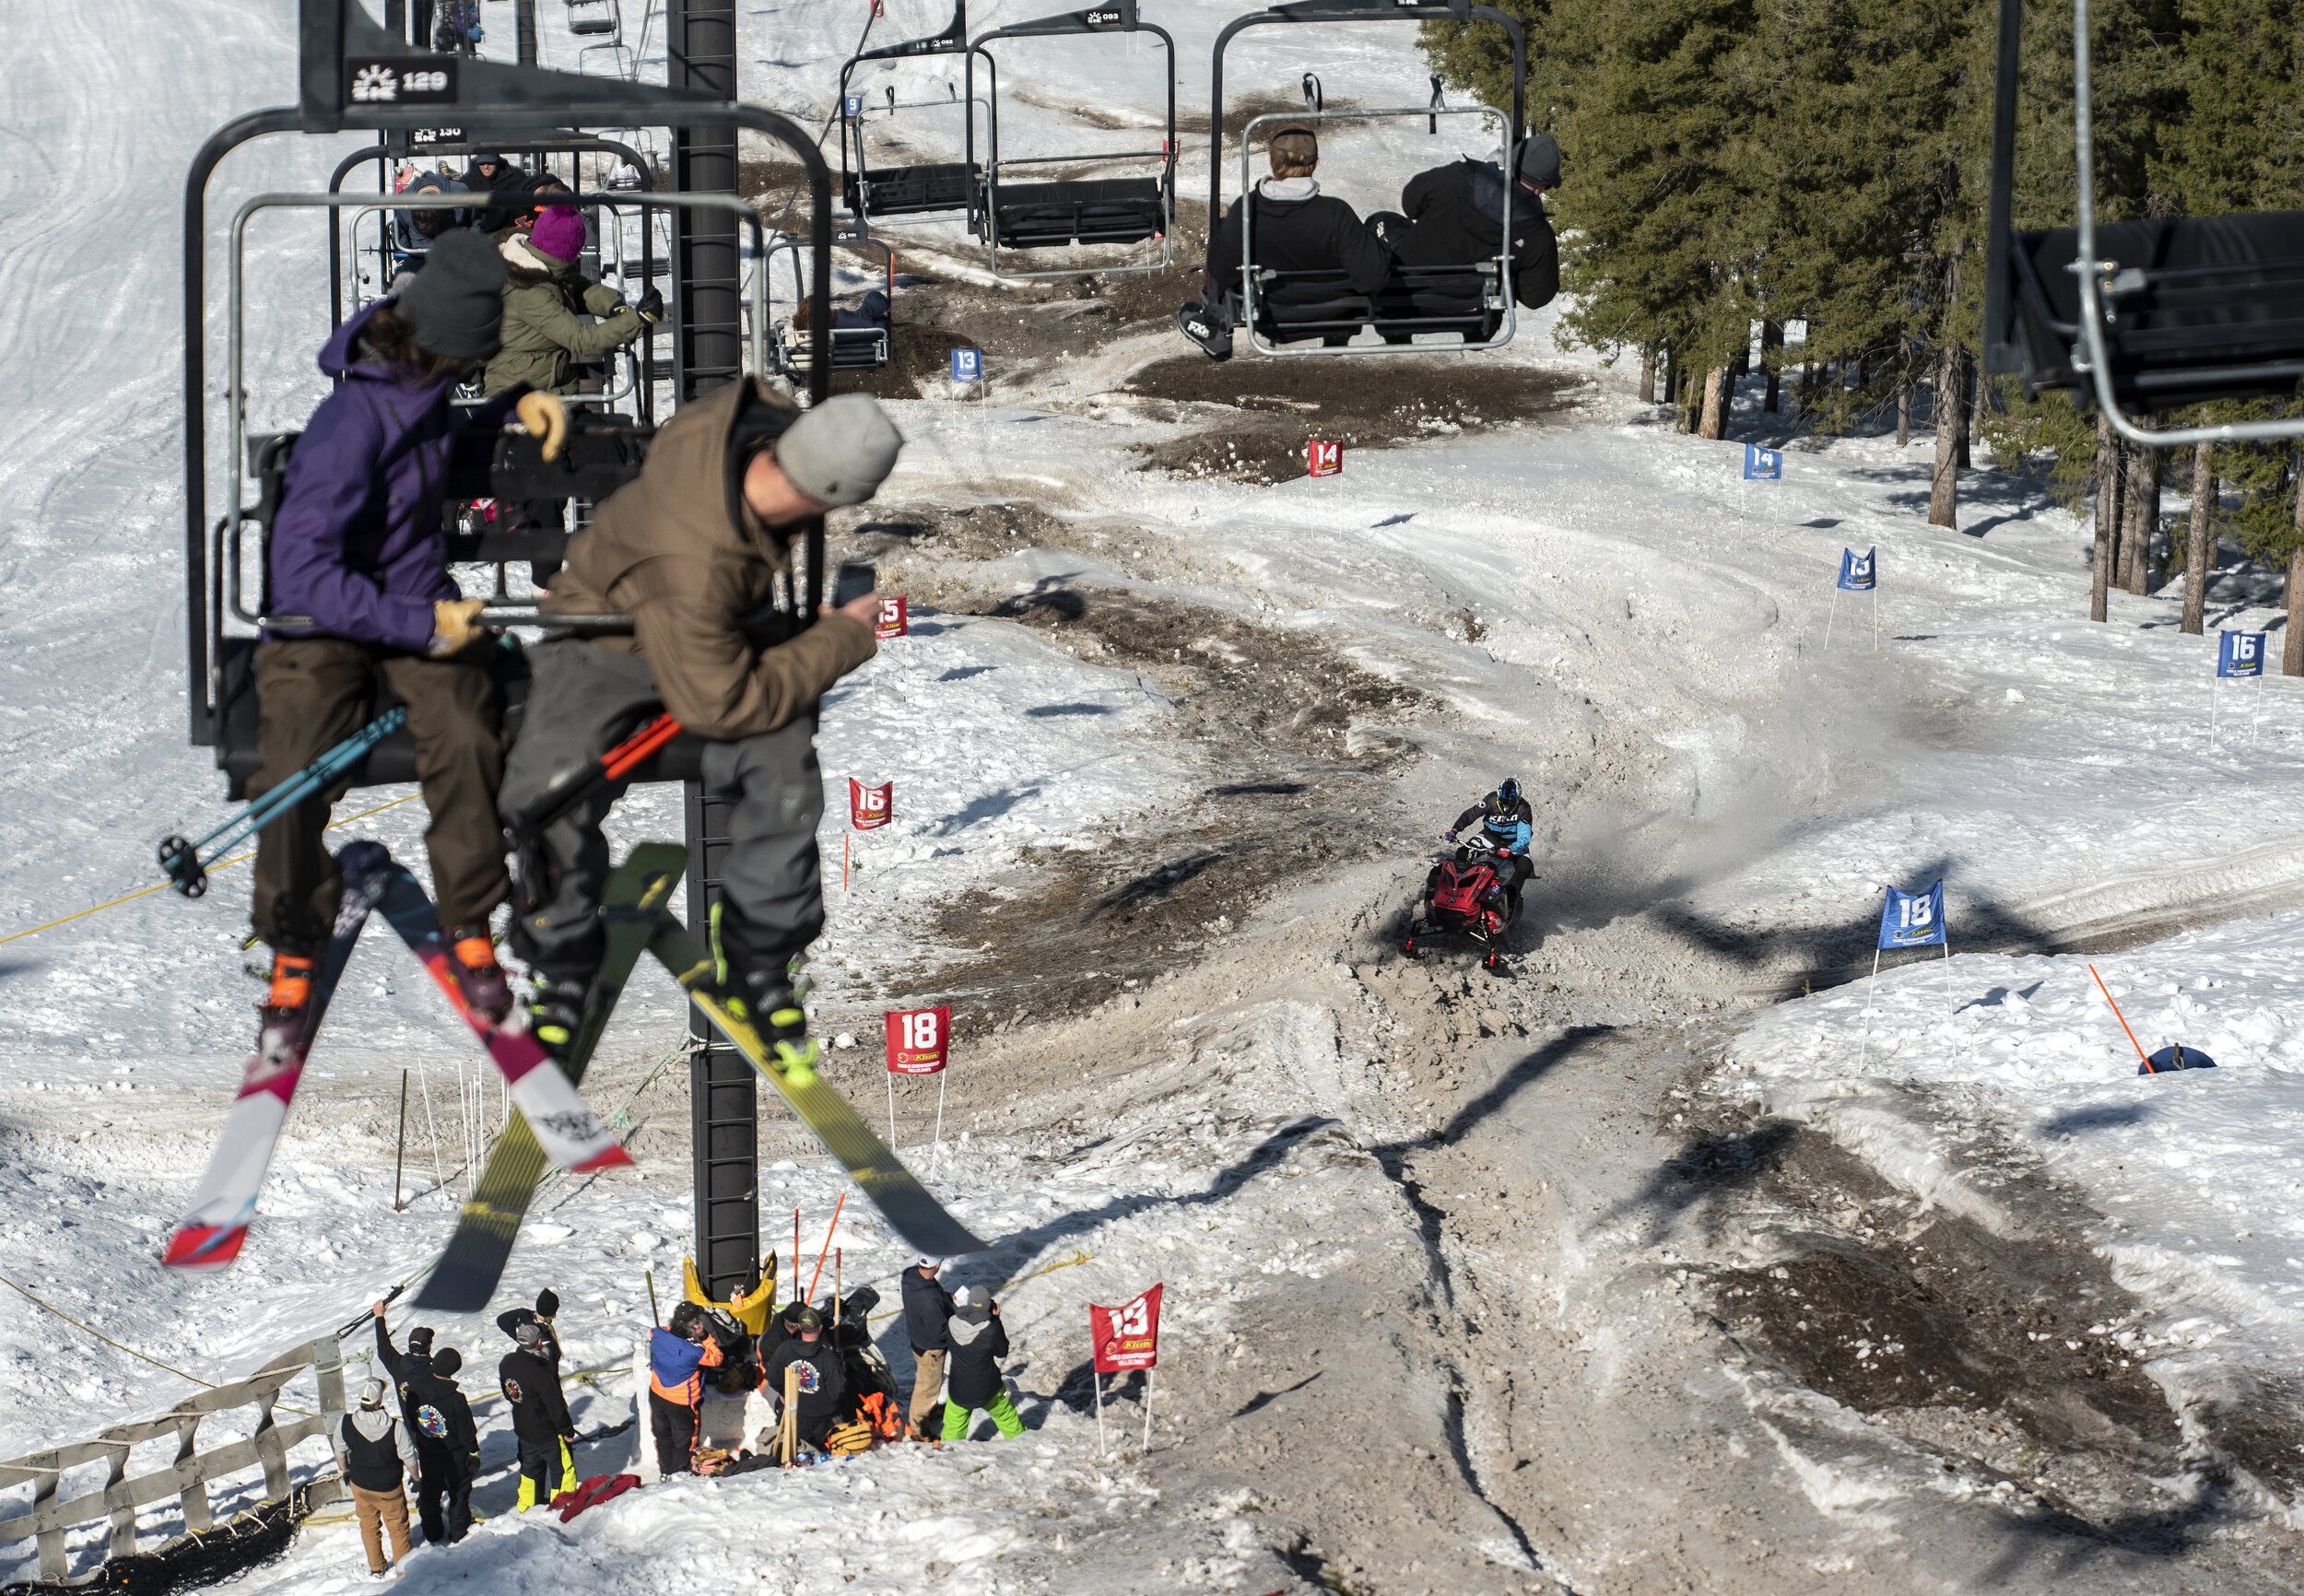  Skiers watch from the Summit Chair Lift as Brad Sharp makes his way through the course during the 900 modified division at the 44th World Championship Snowmobile Hill Climb at Snow King Mountain in Jackson, Wy. on March 31, 2021.  